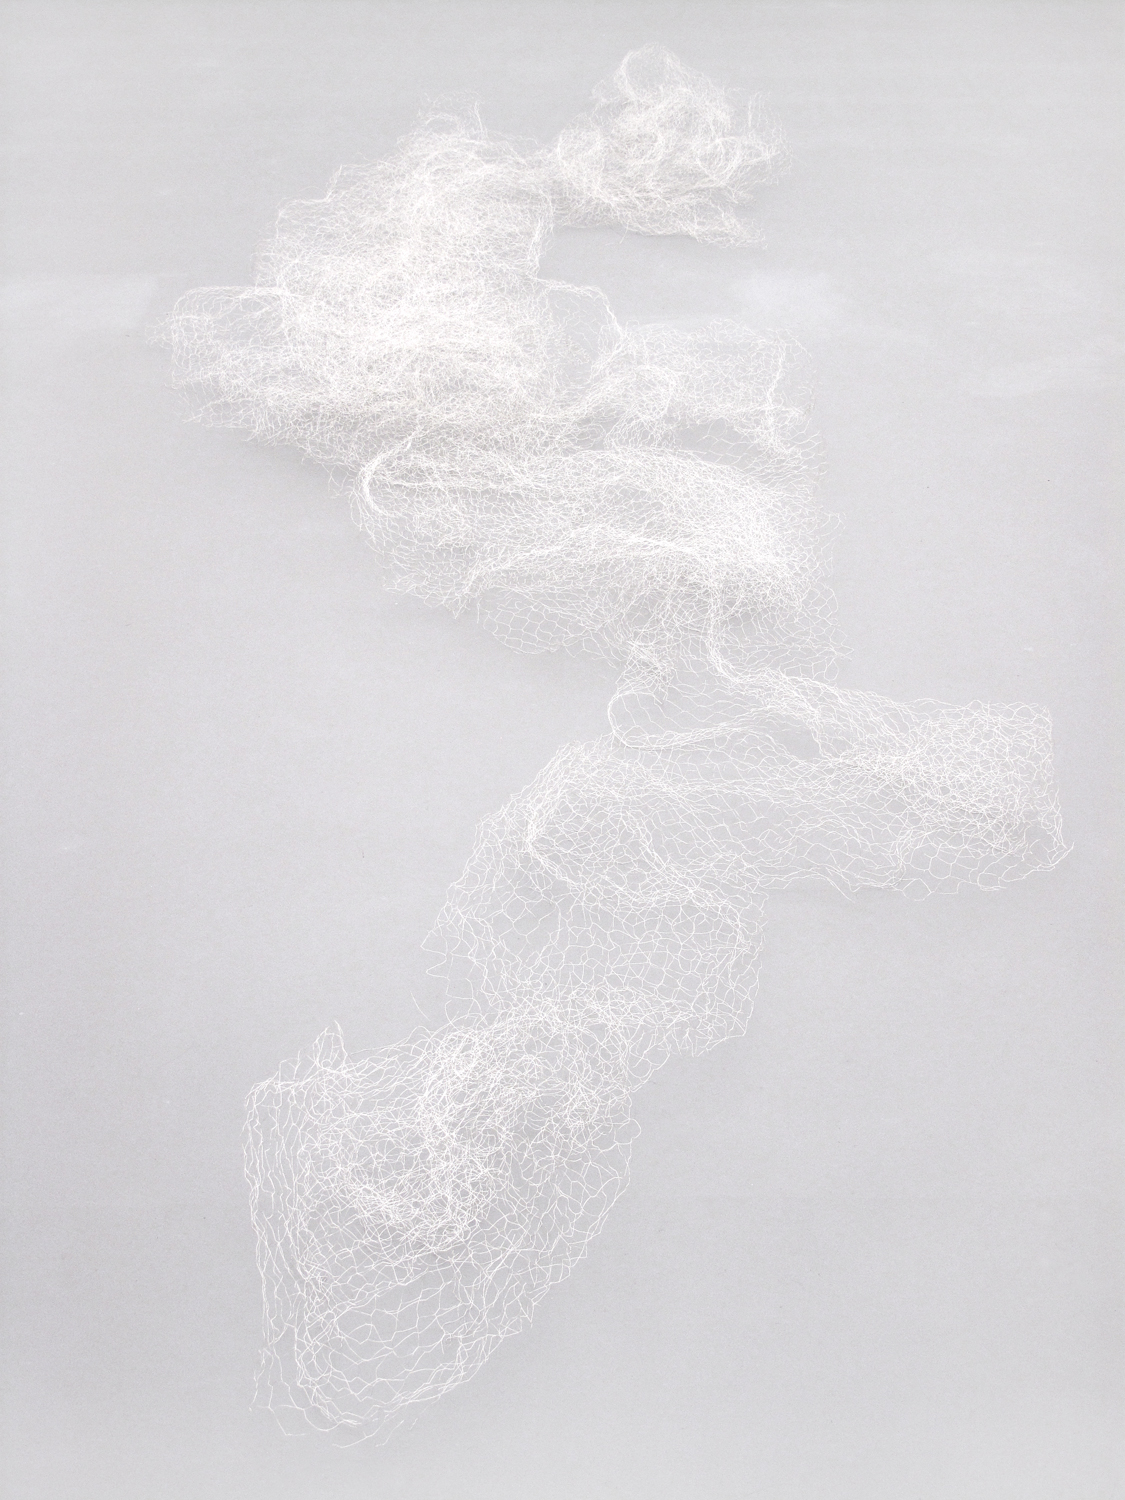   Kamikaze,  2012, wire, dimensions variable 